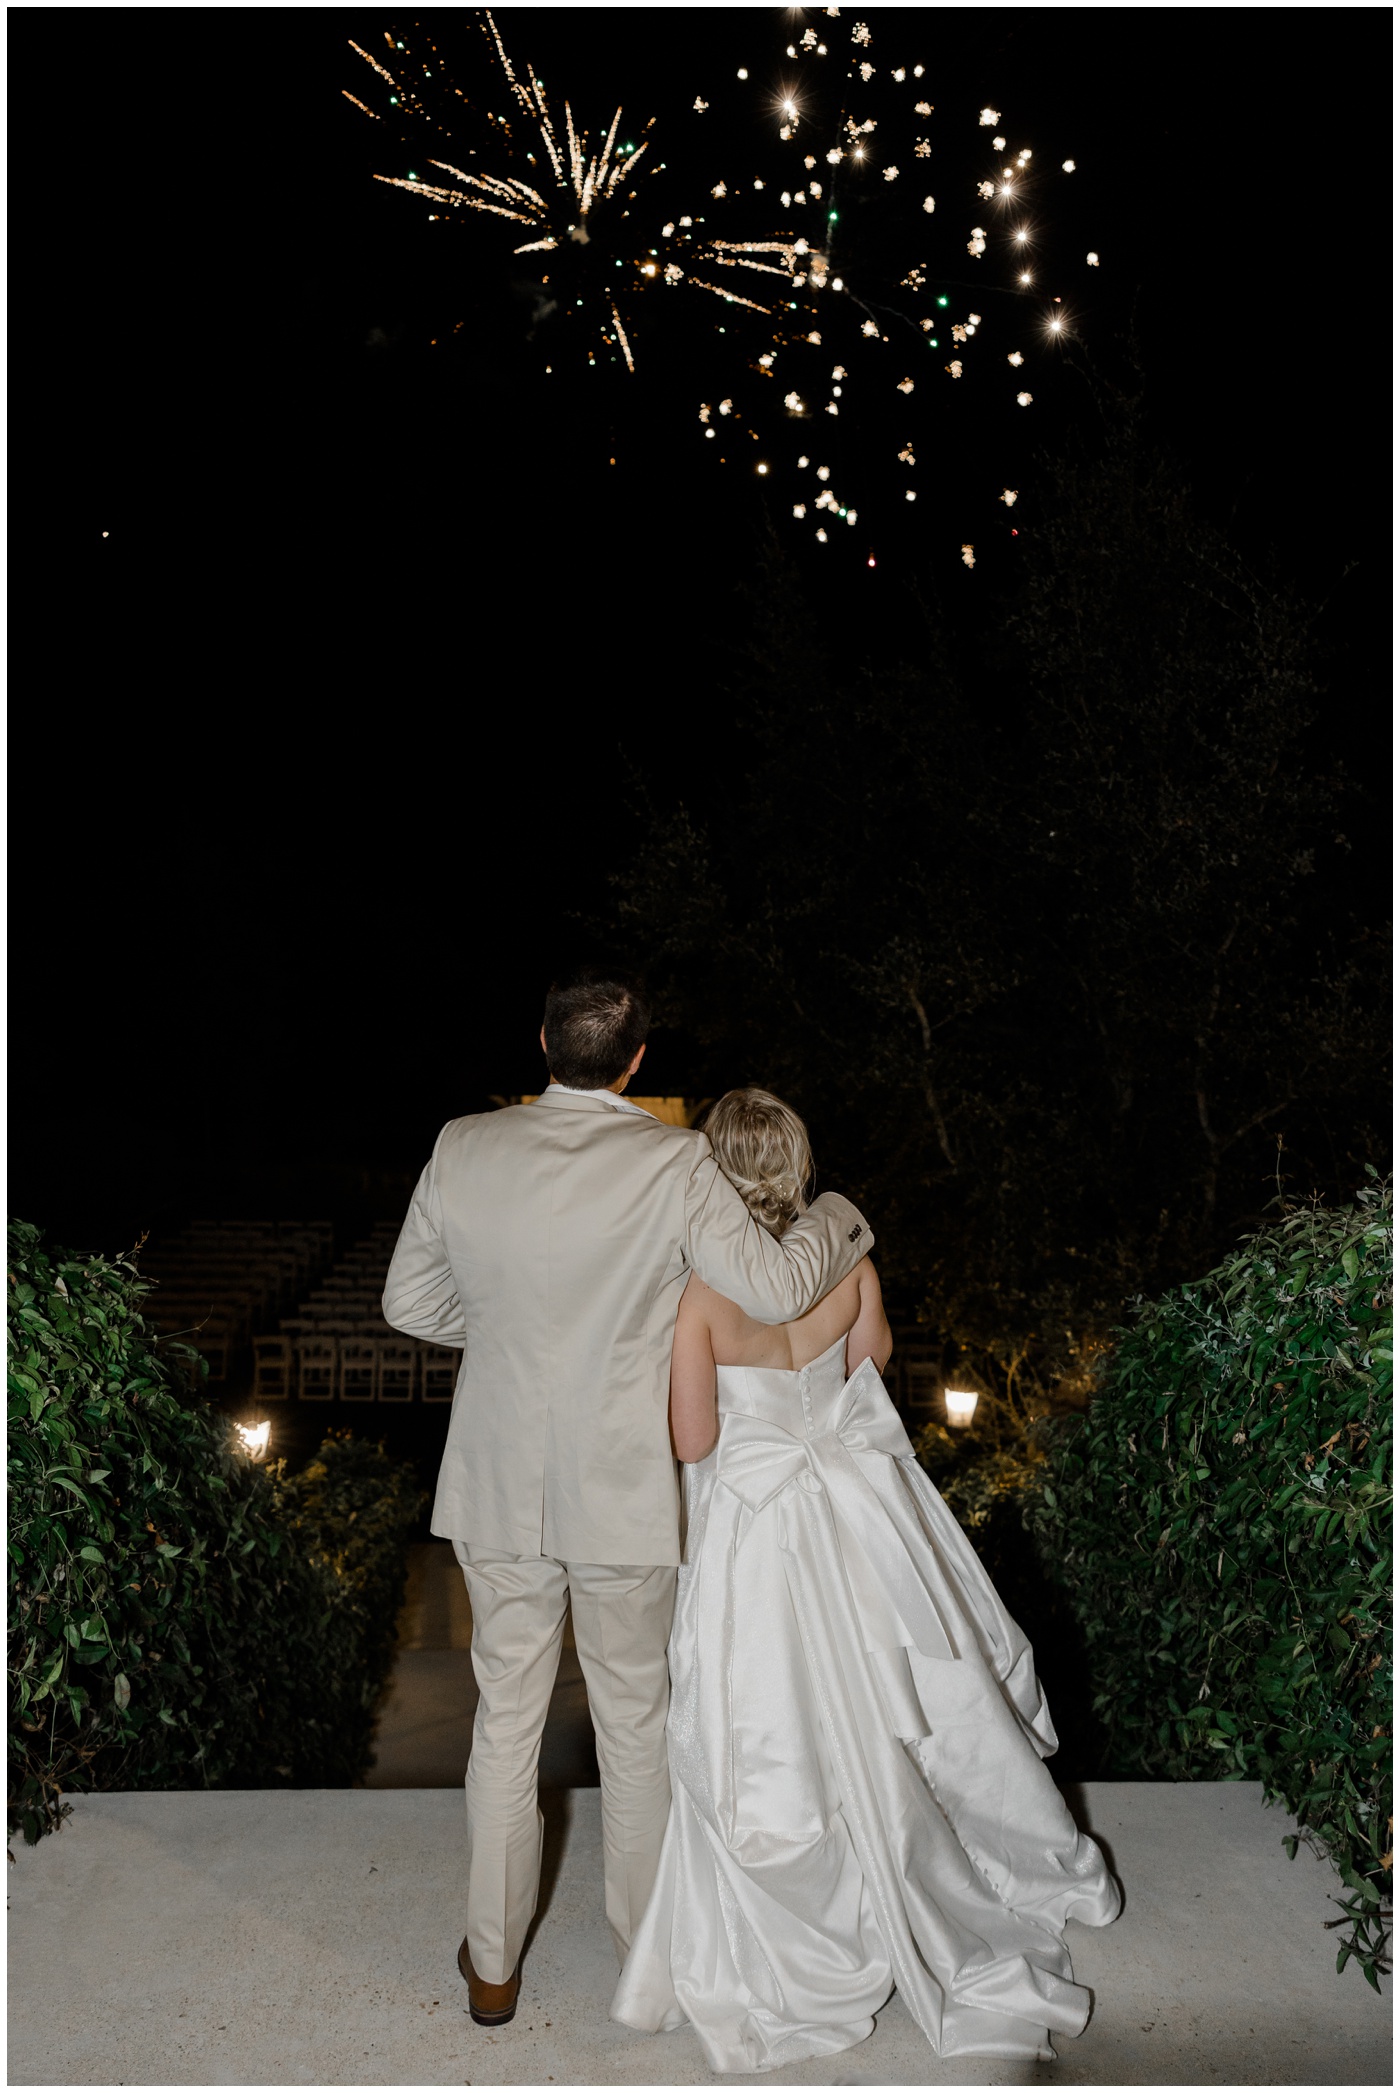 A firework show surprises the bride and groom